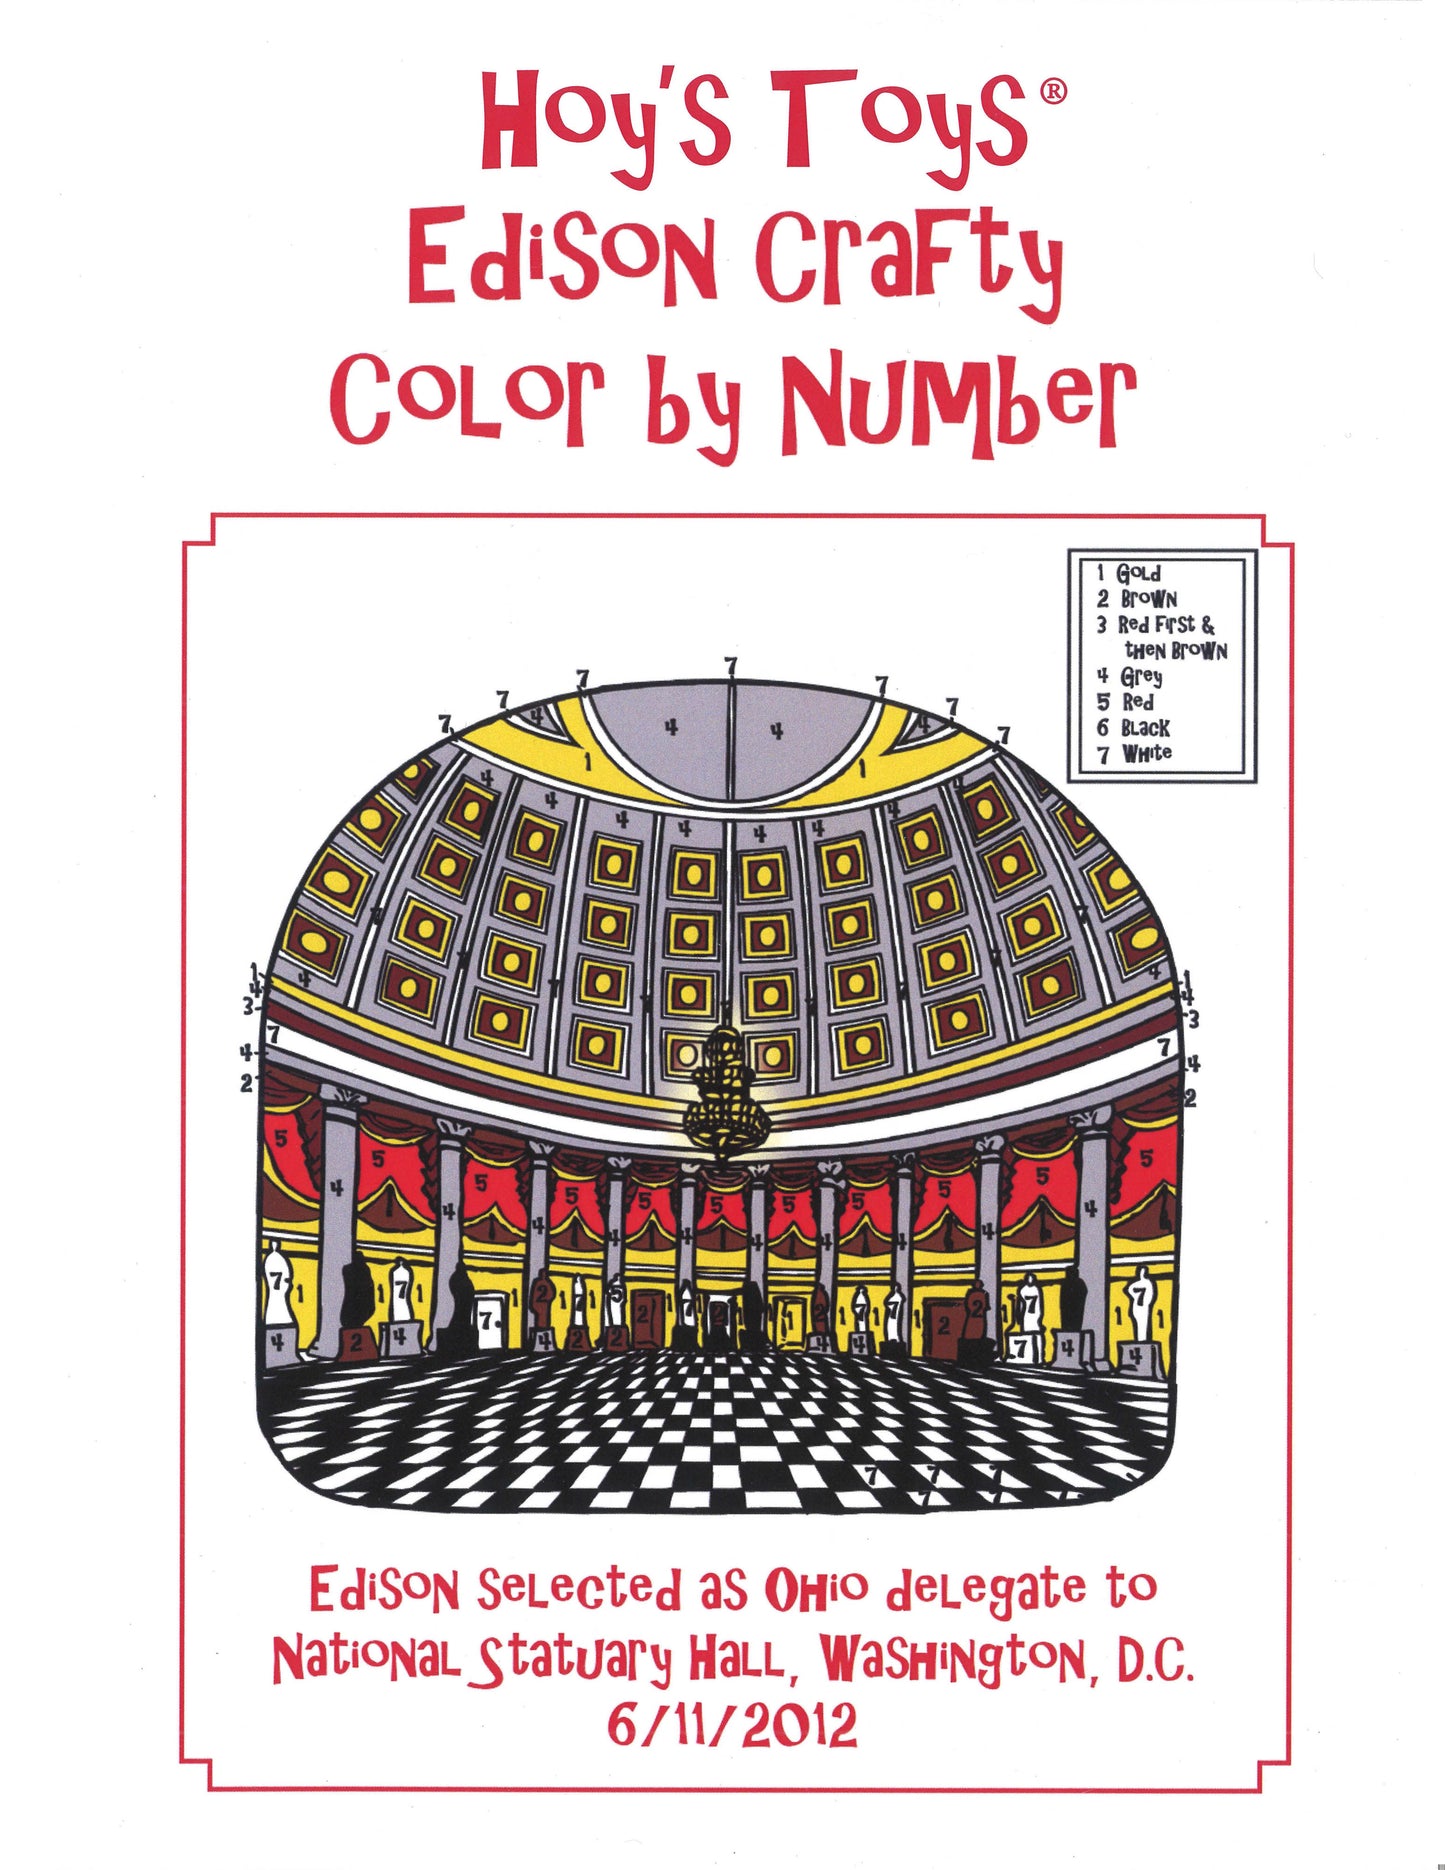 Hoy's Toys Thomas Edison Crafty Color by Number (9 to adult)